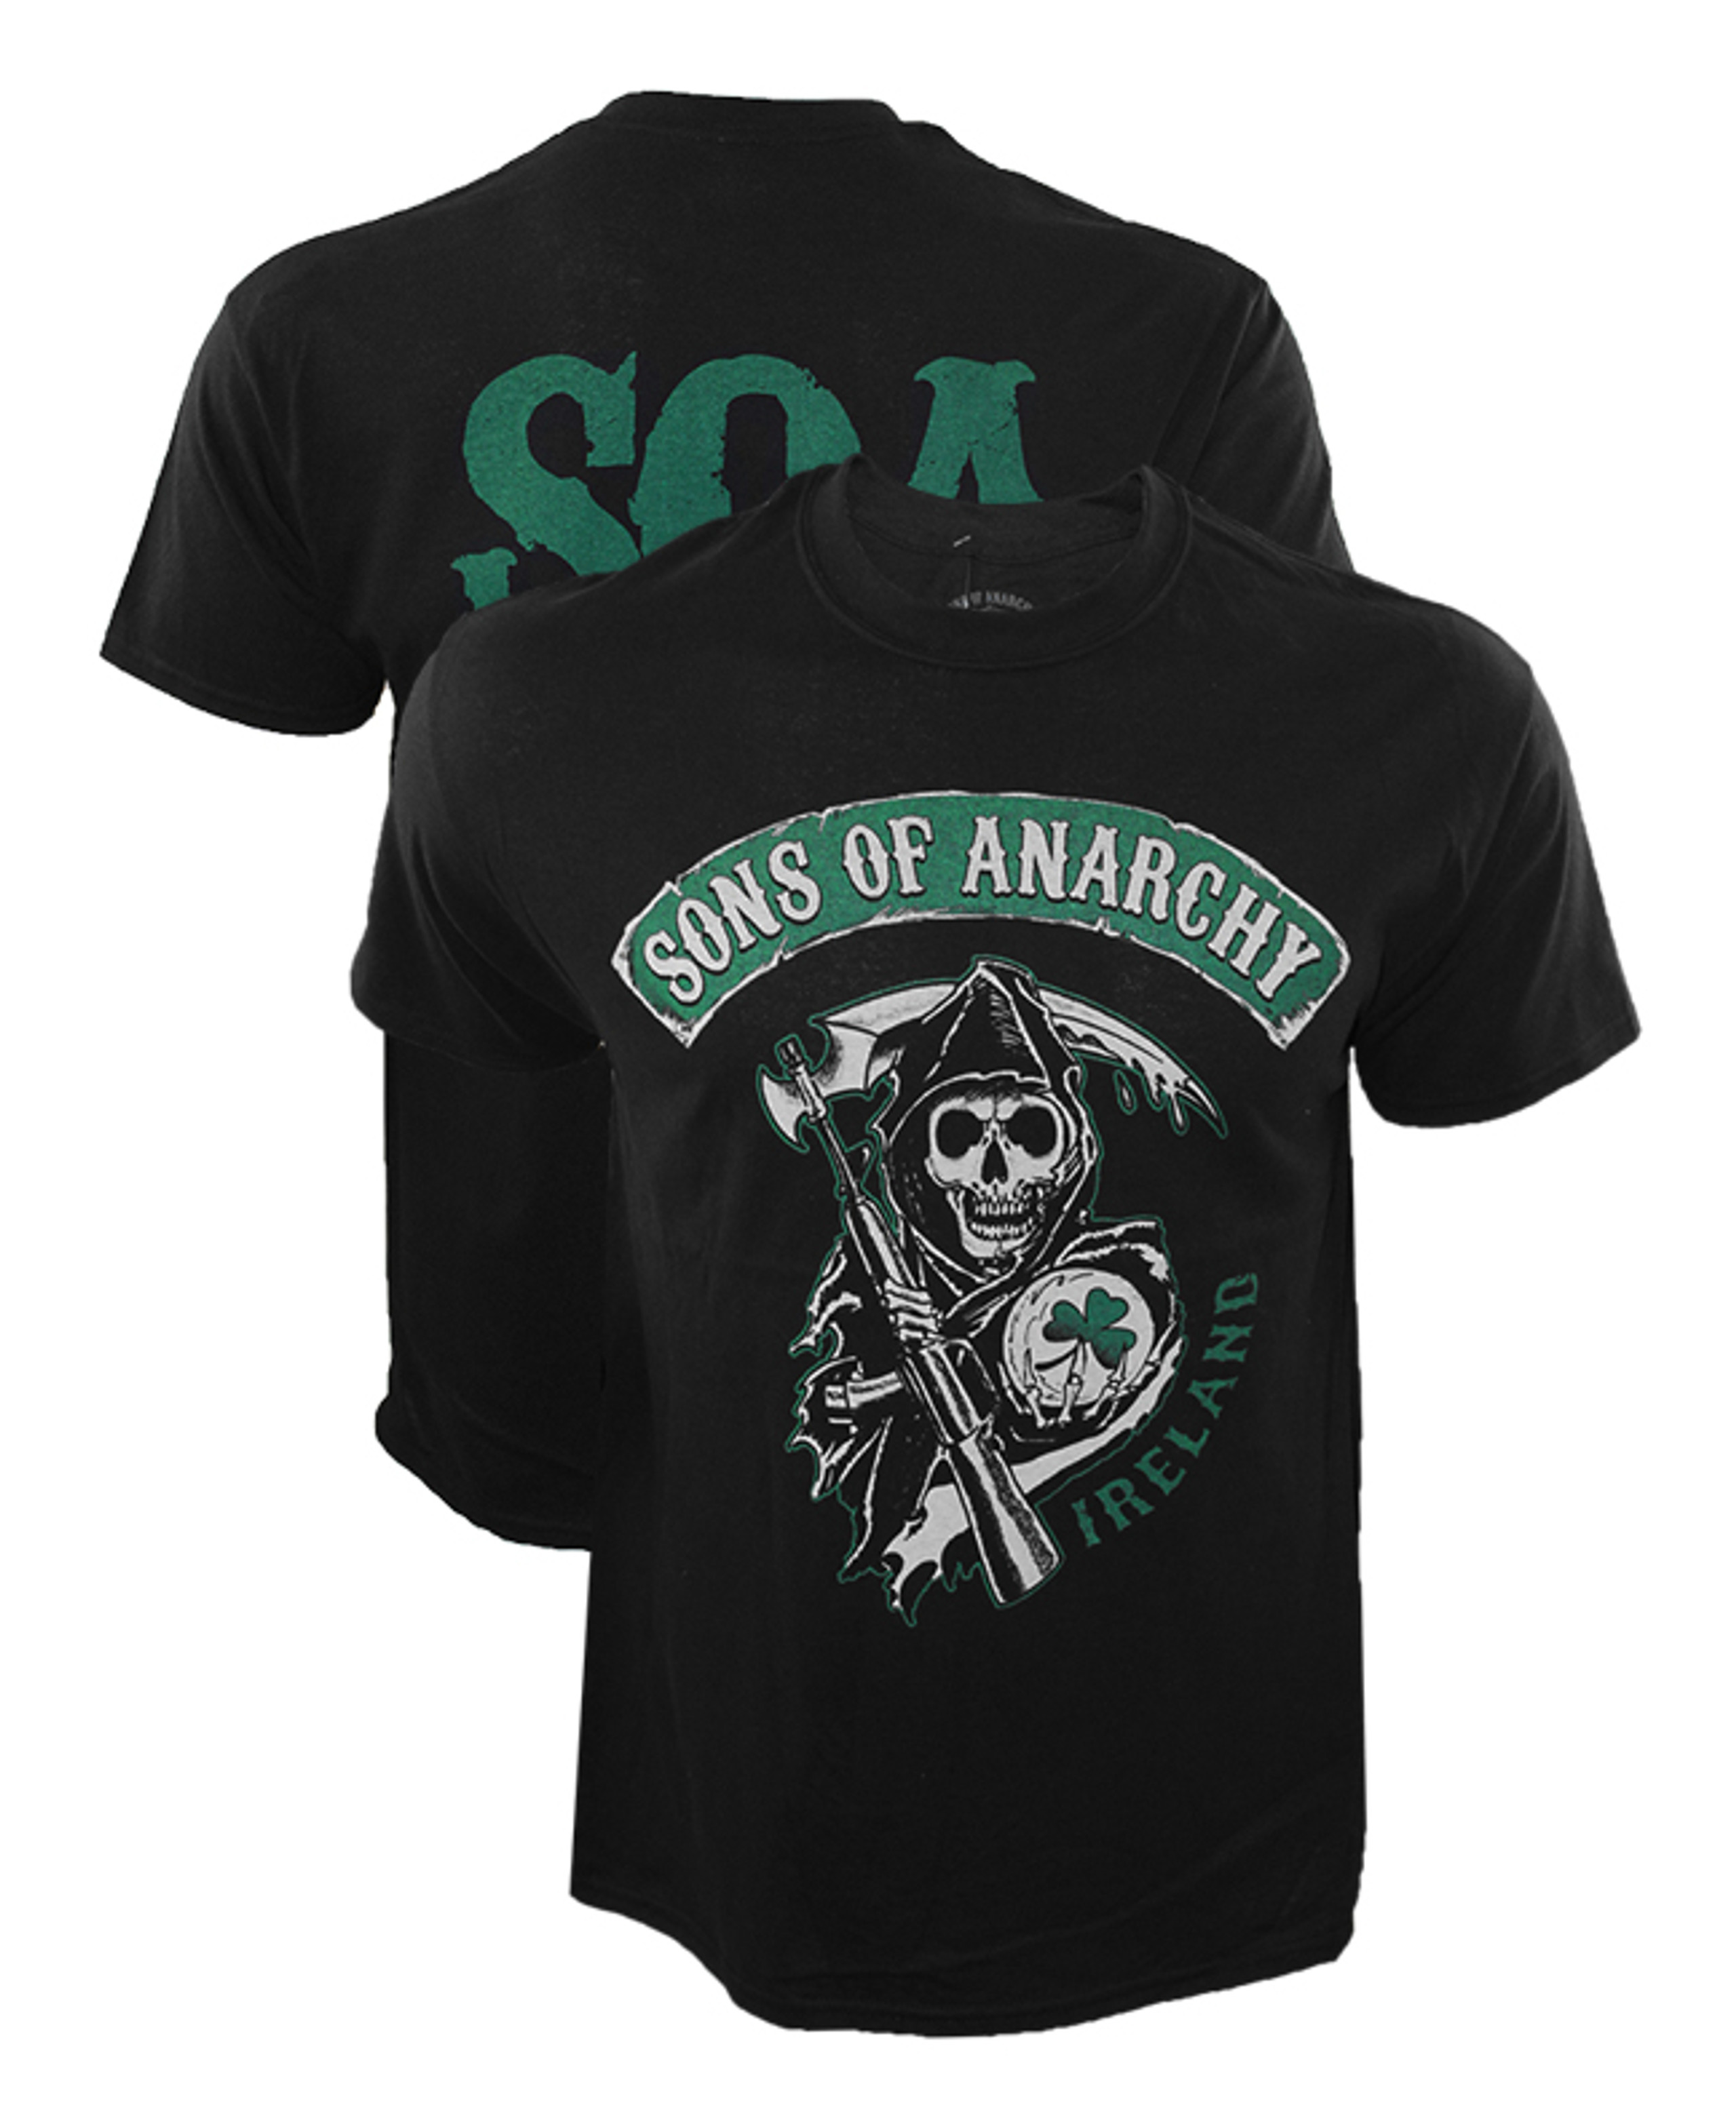 Sons Of Anarchy Ireland Shirt